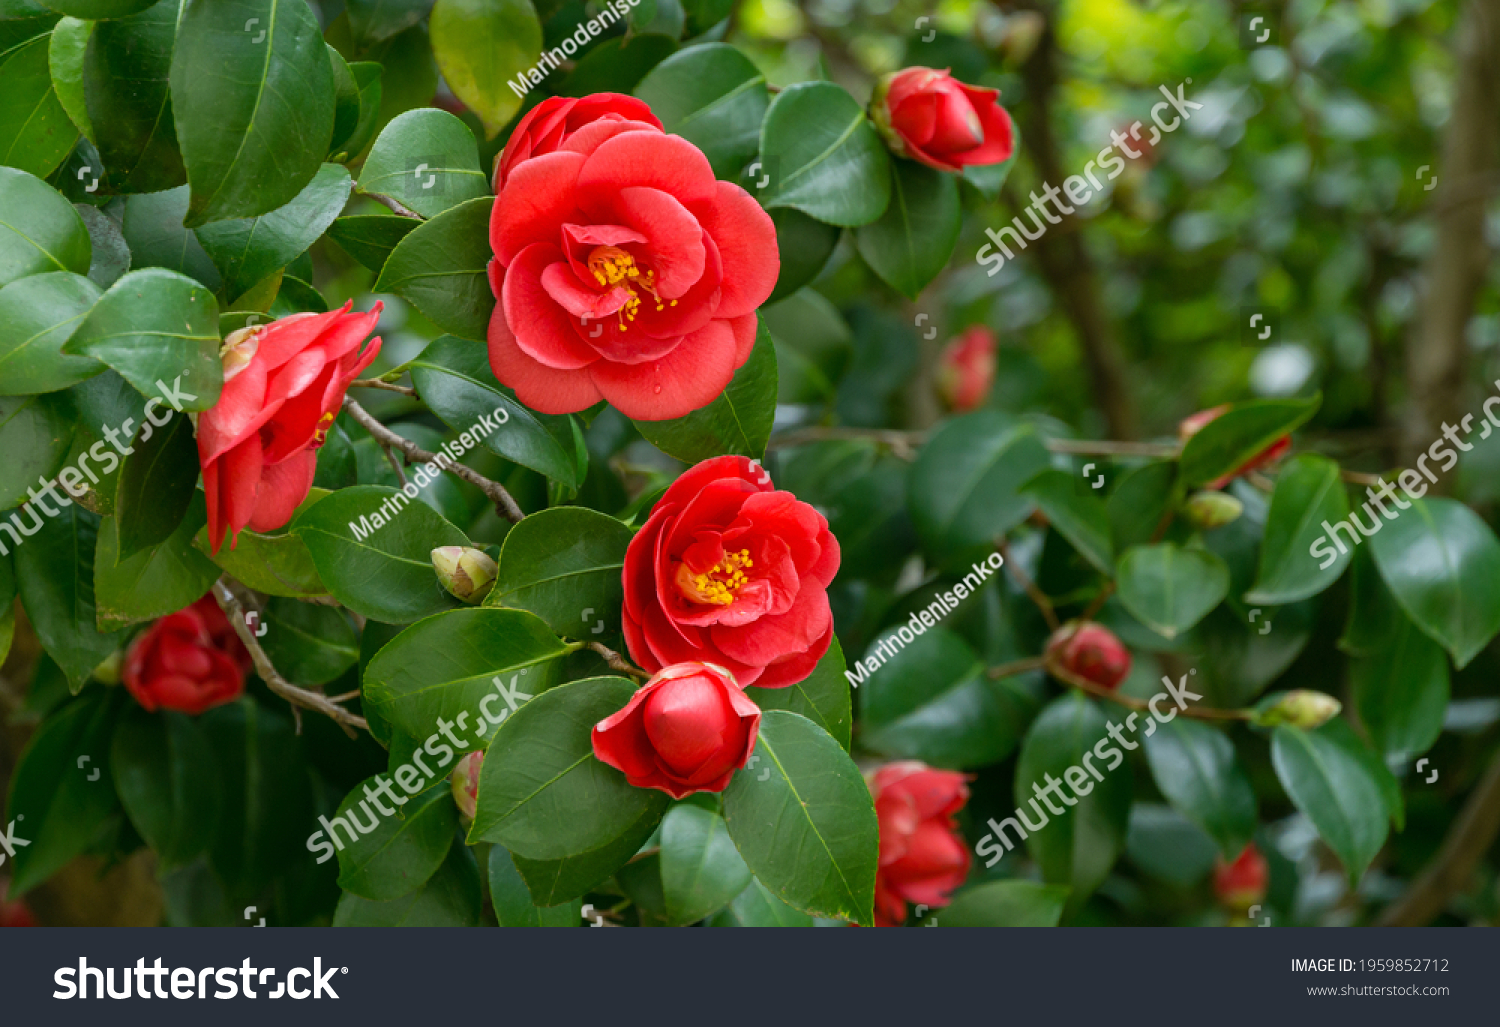 Japanese Camellia (Camellia japonica) in sunny spring day in Arboretum Park Southern Cultures in Sirius (Adler). Red rose-like blooms camellia flower and buds with evergreen glossy leaves on shrub. #1959852712